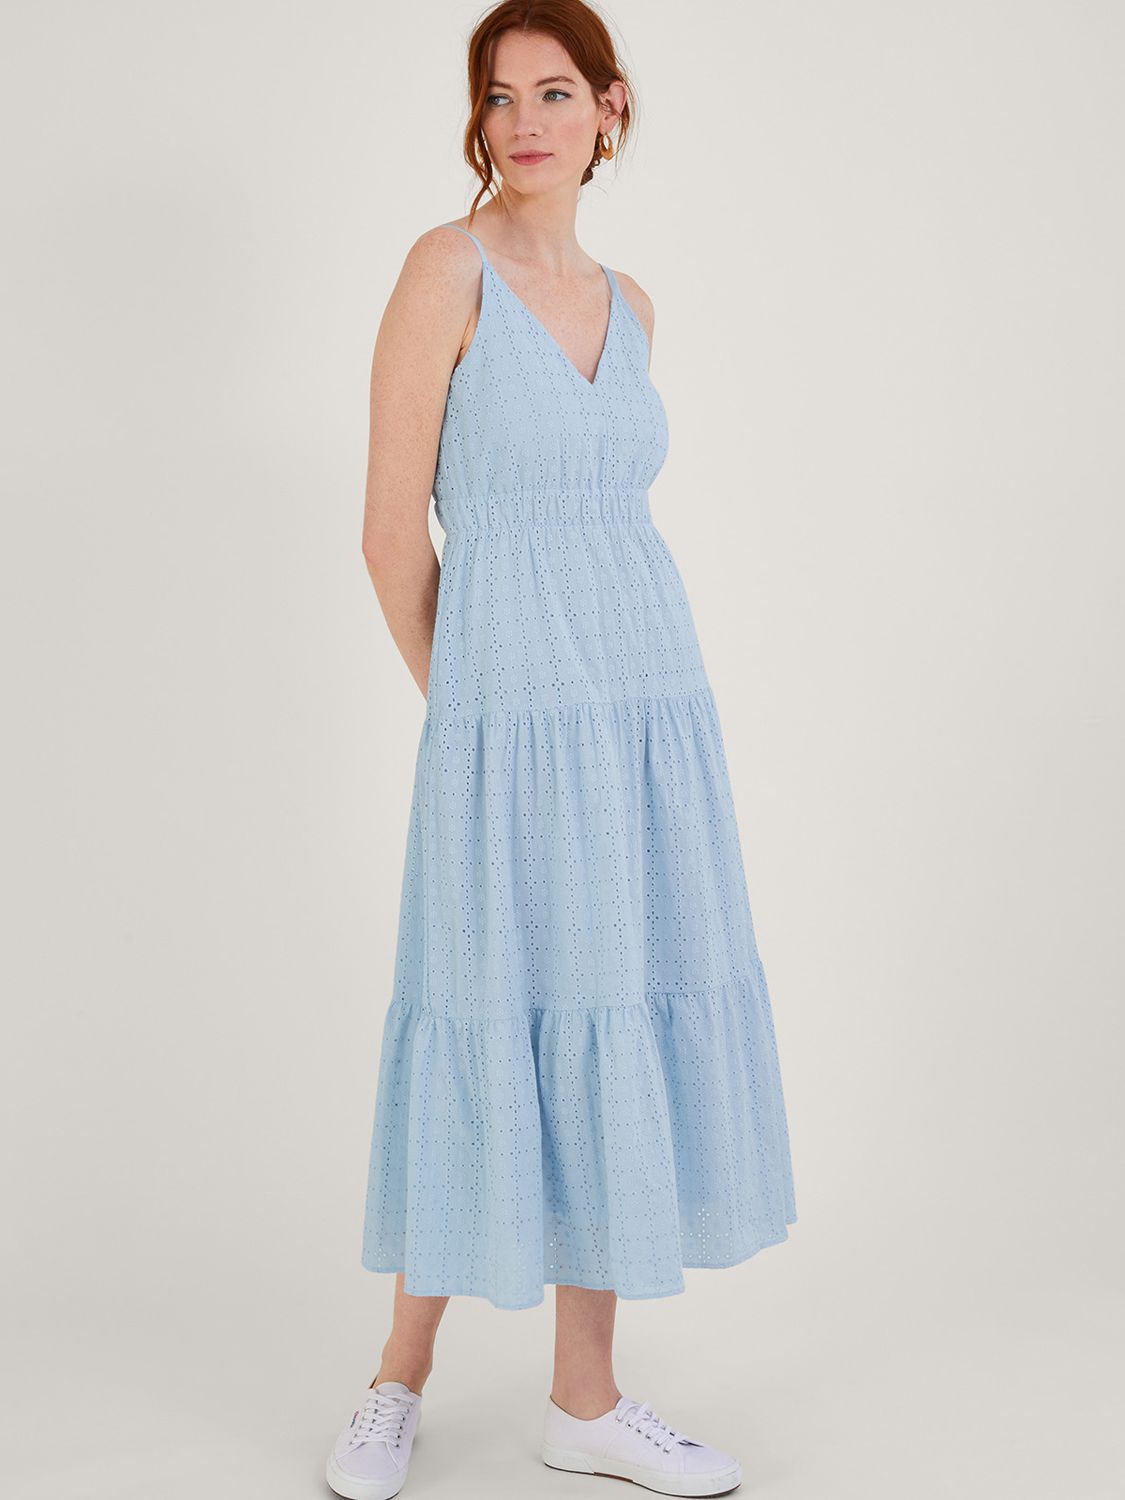 Monsoon Belle Broderie Tiered Dress, Blue at John Lewis & Partners